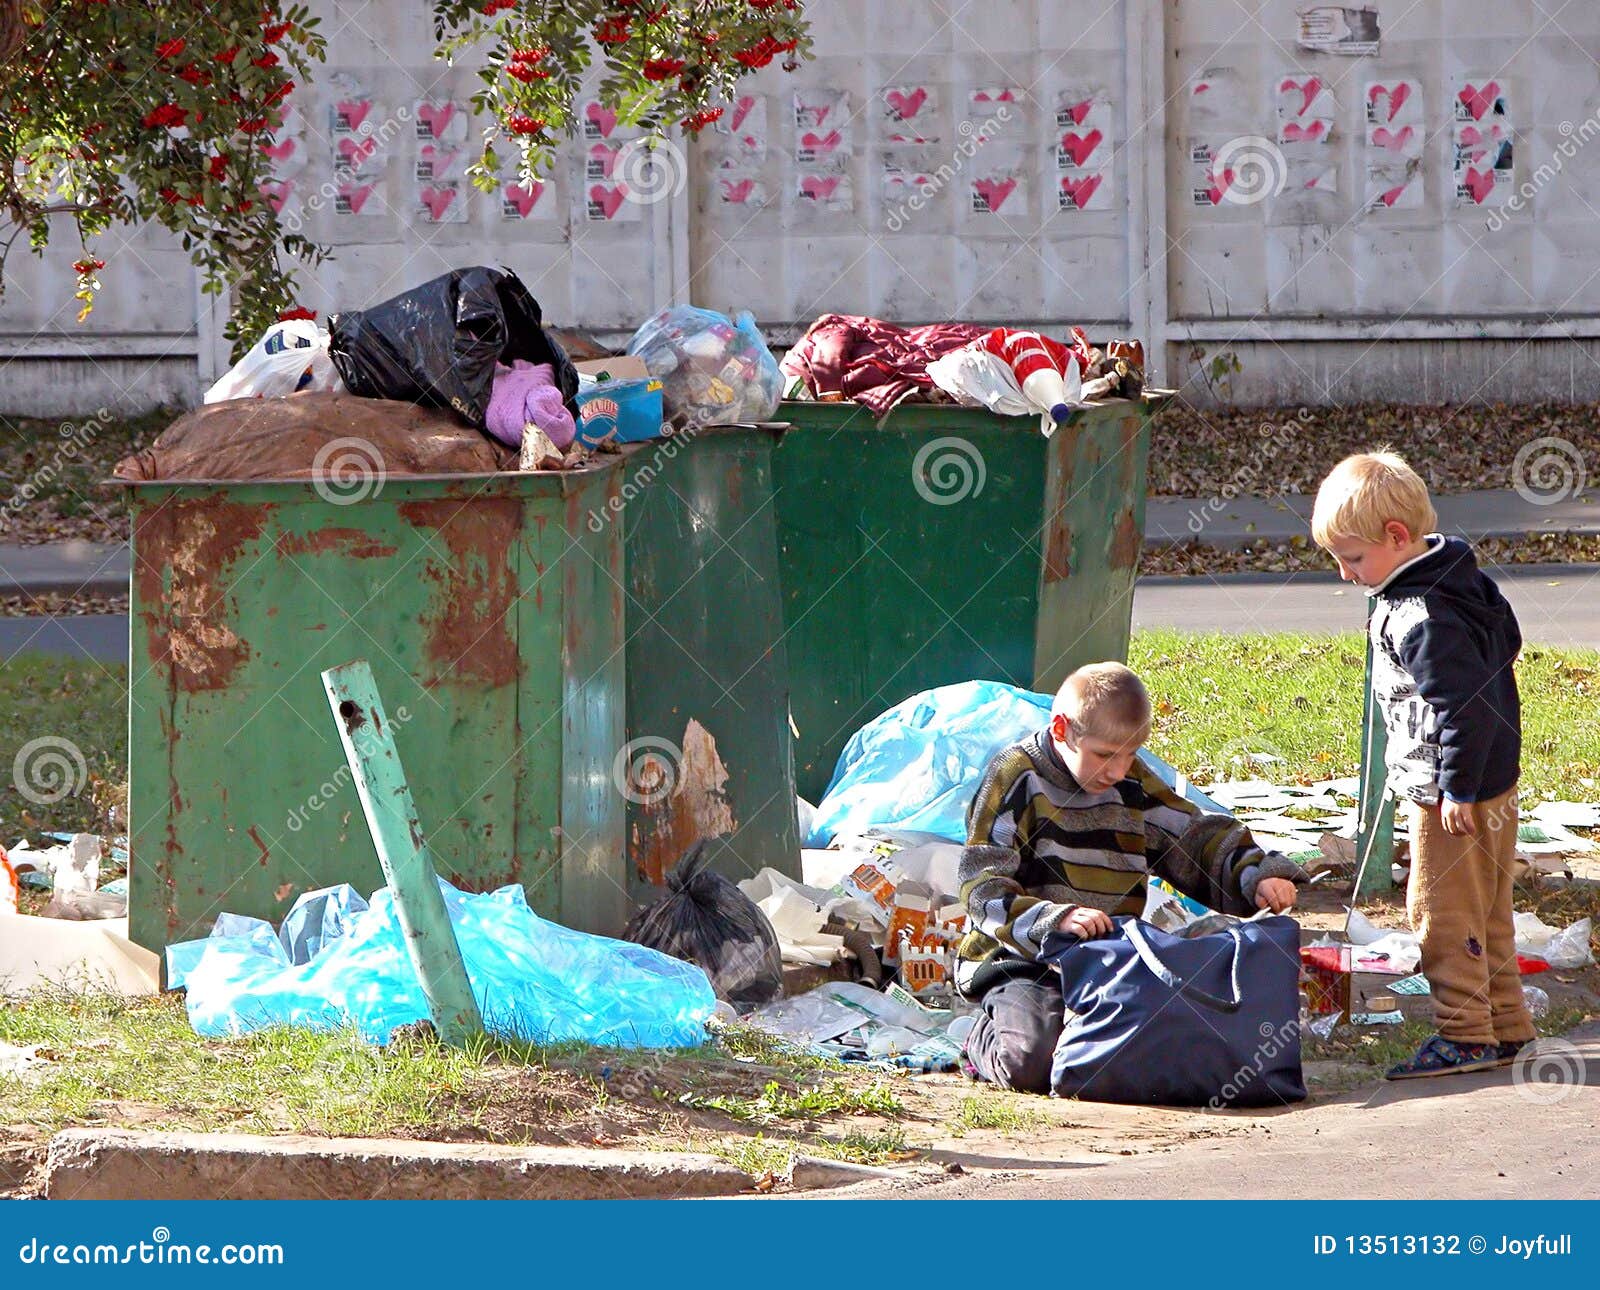 5 009 Children Homeless Photos Free Royalty Free Stock Photos From Dreamstime